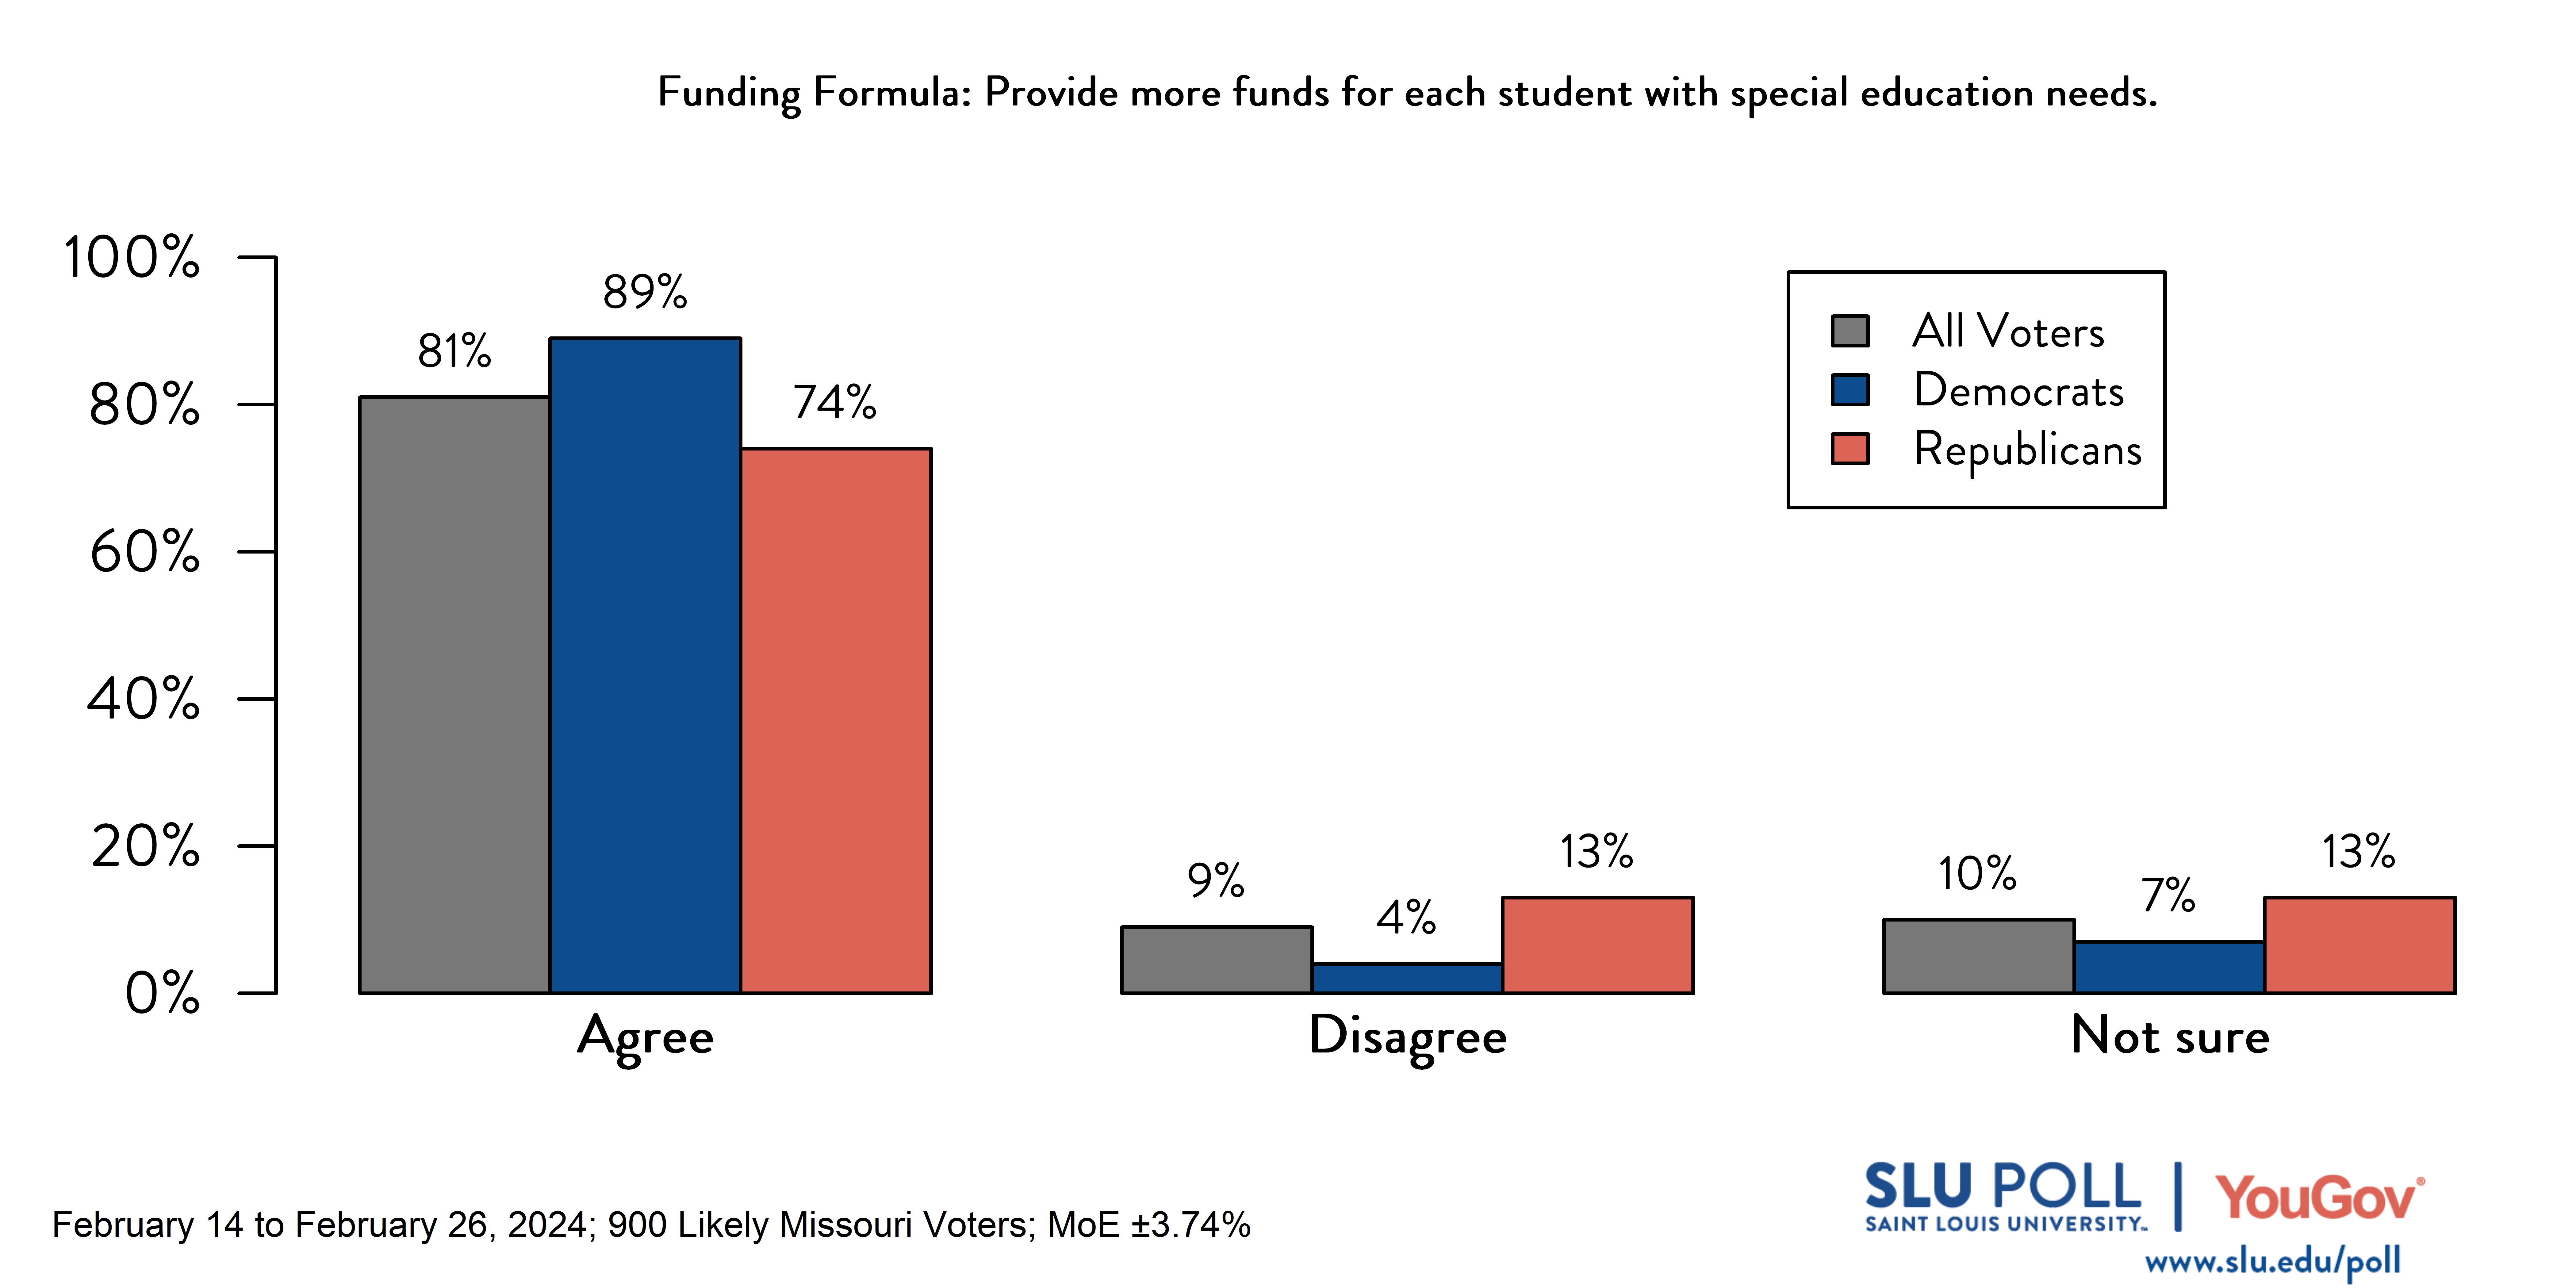 Bar graph with SLU/YouGov Poll results for school funding formula special education question. Results in caption.